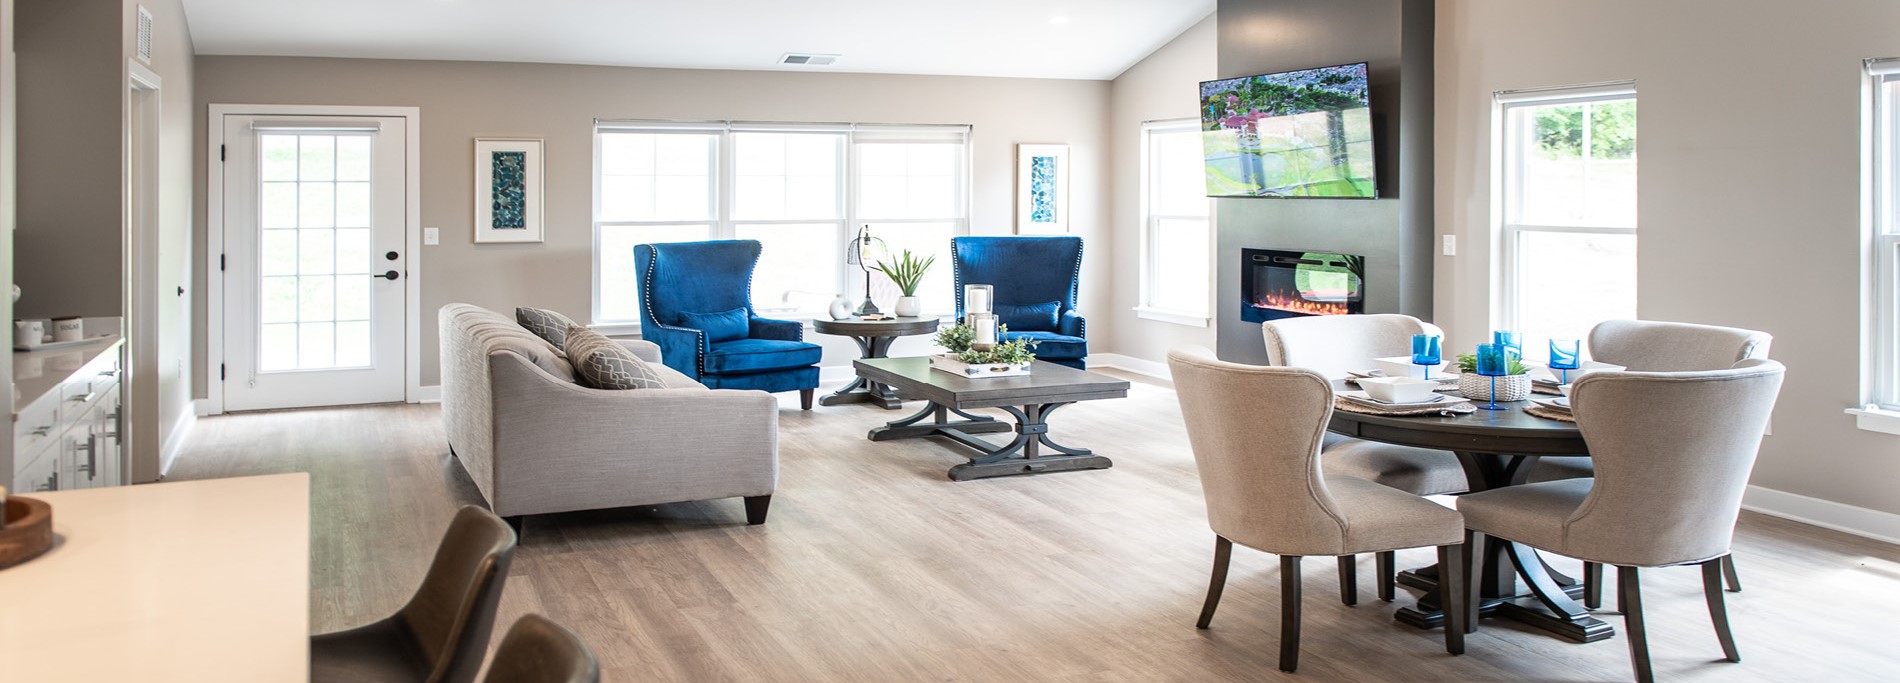 Spacious Living room and Kitchen Area at Champion Reserve Townhomes